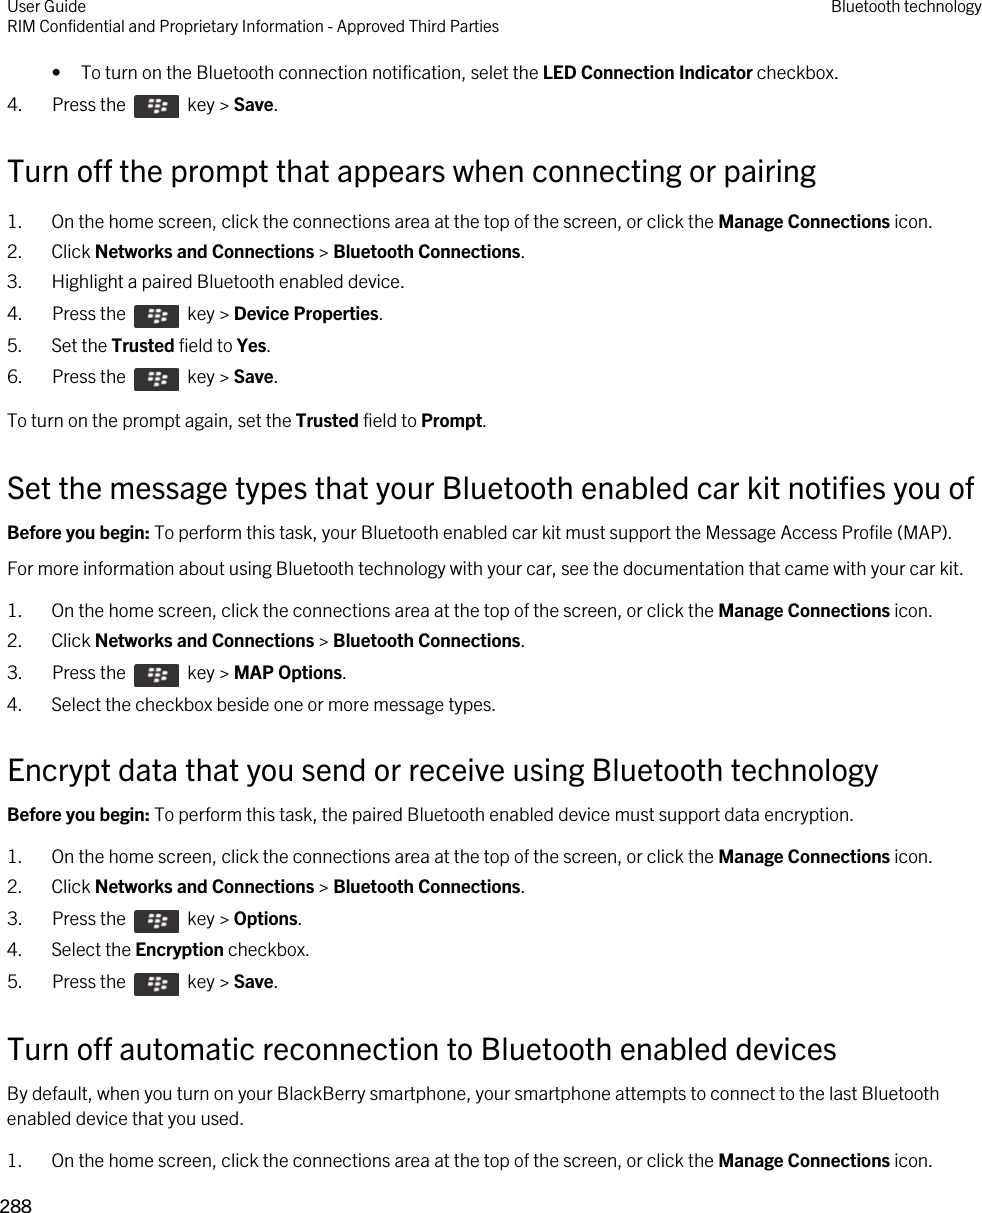 • To turn on the Bluetooth connection notification, selet the LED Connection Indicator checkbox.4.  Press the    key &gt; Save. Turn off the prompt that appears when connecting or pairing1. On the home screen, click the connections area at the top of the screen, or click the Manage Connections icon.2. Click Networks and Connections &gt; Bluetooth Connections.3. Highlight a paired Bluetooth enabled device.4.  Press the    key &gt; Device Properties. 5. Set the Trusted field to Yes.6.  Press the    key &gt; Save. To turn on the prompt again, set the Trusted field to Prompt.Set the message types that your Bluetooth enabled car kit notifies you ofBefore you begin: To perform this task, your Bluetooth enabled car kit must support the Message Access Profile (MAP).For more information about using Bluetooth technology with your car, see the documentation that came with your car kit.1. On the home screen, click the connections area at the top of the screen, or click the Manage Connections icon.2. Click Networks and Connections &gt; Bluetooth Connections.3.  Press the    key &gt; MAP Options. 4. Select the checkbox beside one or more message types.Encrypt data that you send or receive using Bluetooth technologyBefore you begin: To perform this task, the paired Bluetooth enabled device must support data encryption.1. On the home screen, click the connections area at the top of the screen, or click the Manage Connections icon.2. Click Networks and Connections &gt; Bluetooth Connections.3.  Press the    key &gt; Options. 4. Select the Encryption checkbox.5.  Press the    key &gt; Save. Turn off automatic reconnection to Bluetooth enabled devicesBy default, when you turn on your BlackBerry smartphone, your smartphone attempts to connect to the last Bluetooth enabled device that you used.1. On the home screen, click the connections area at the top of the screen, or click the Manage Connections icon.User GuideRIM Confidential and Proprietary Information - Approved Third Parties Bluetooth technology288 